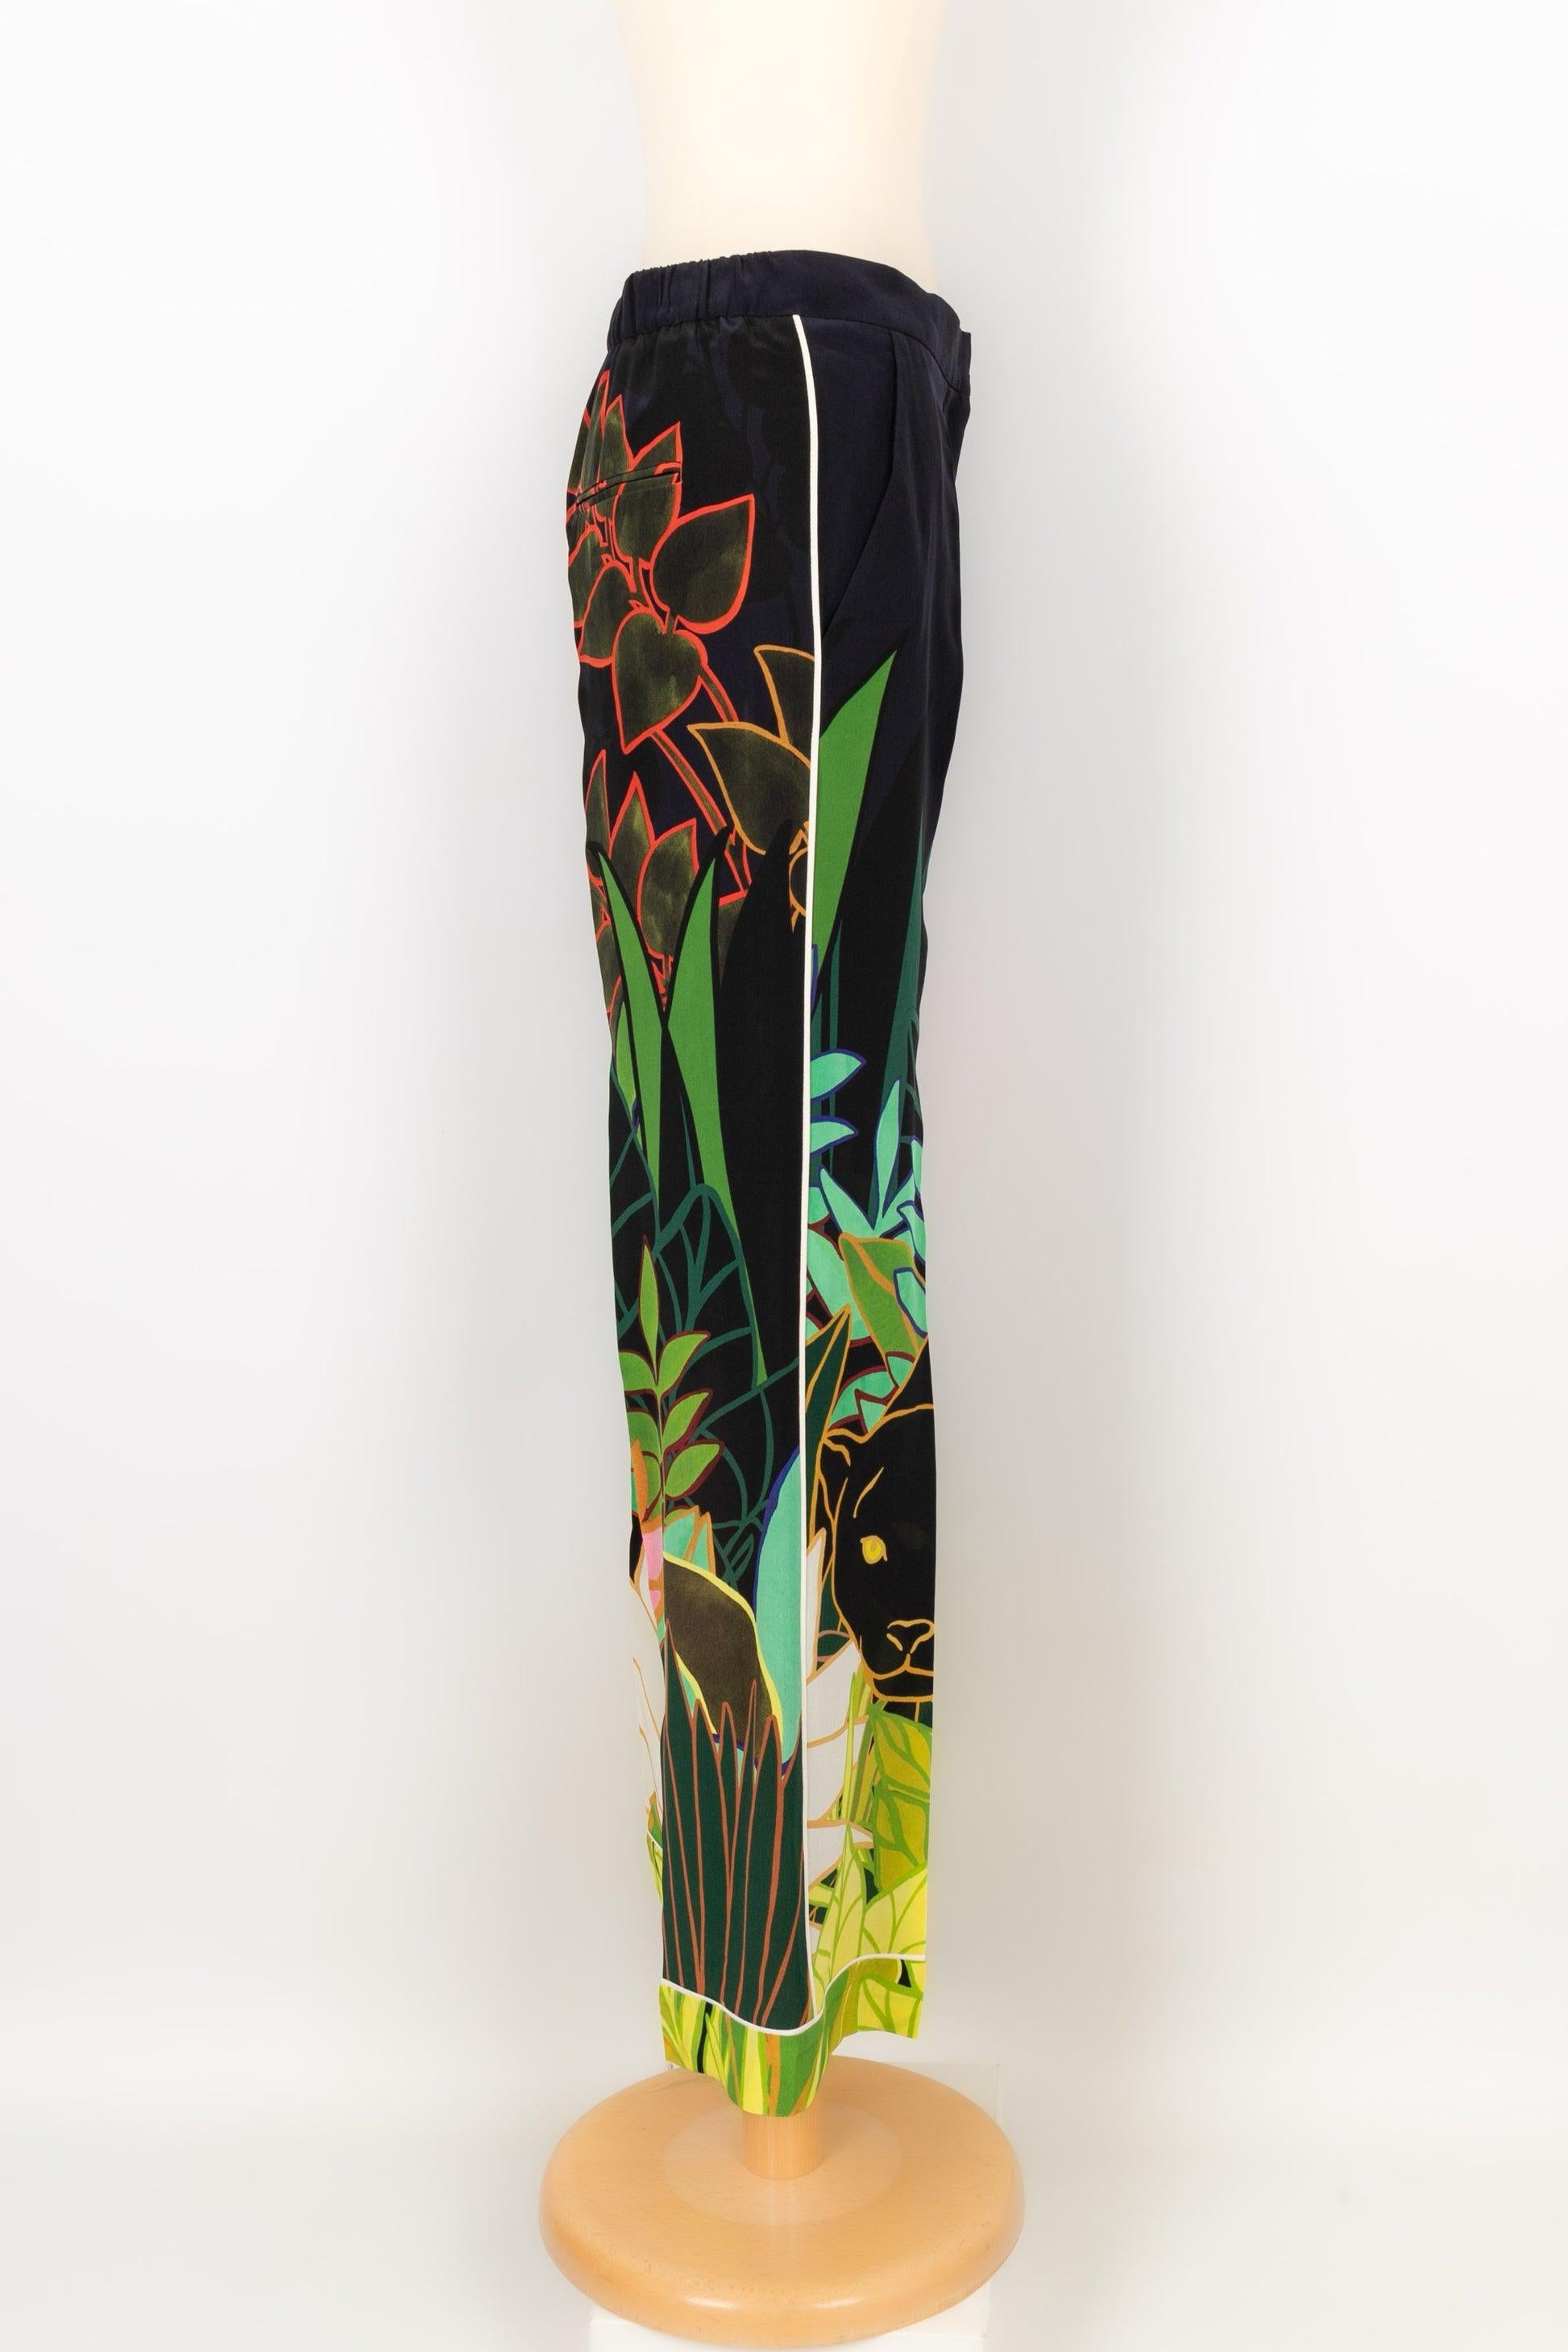 Valentino - (Made in Italy) Silk pants printed with flowers. Indicated size 38FR. Spring-Summer 2020 Collection.

Additional information:
Condition: Very good condition
Dimensions: Waist: 37 cm - Hips: 46 cm - Length: 100 cm

Seller Reference: FJ71
